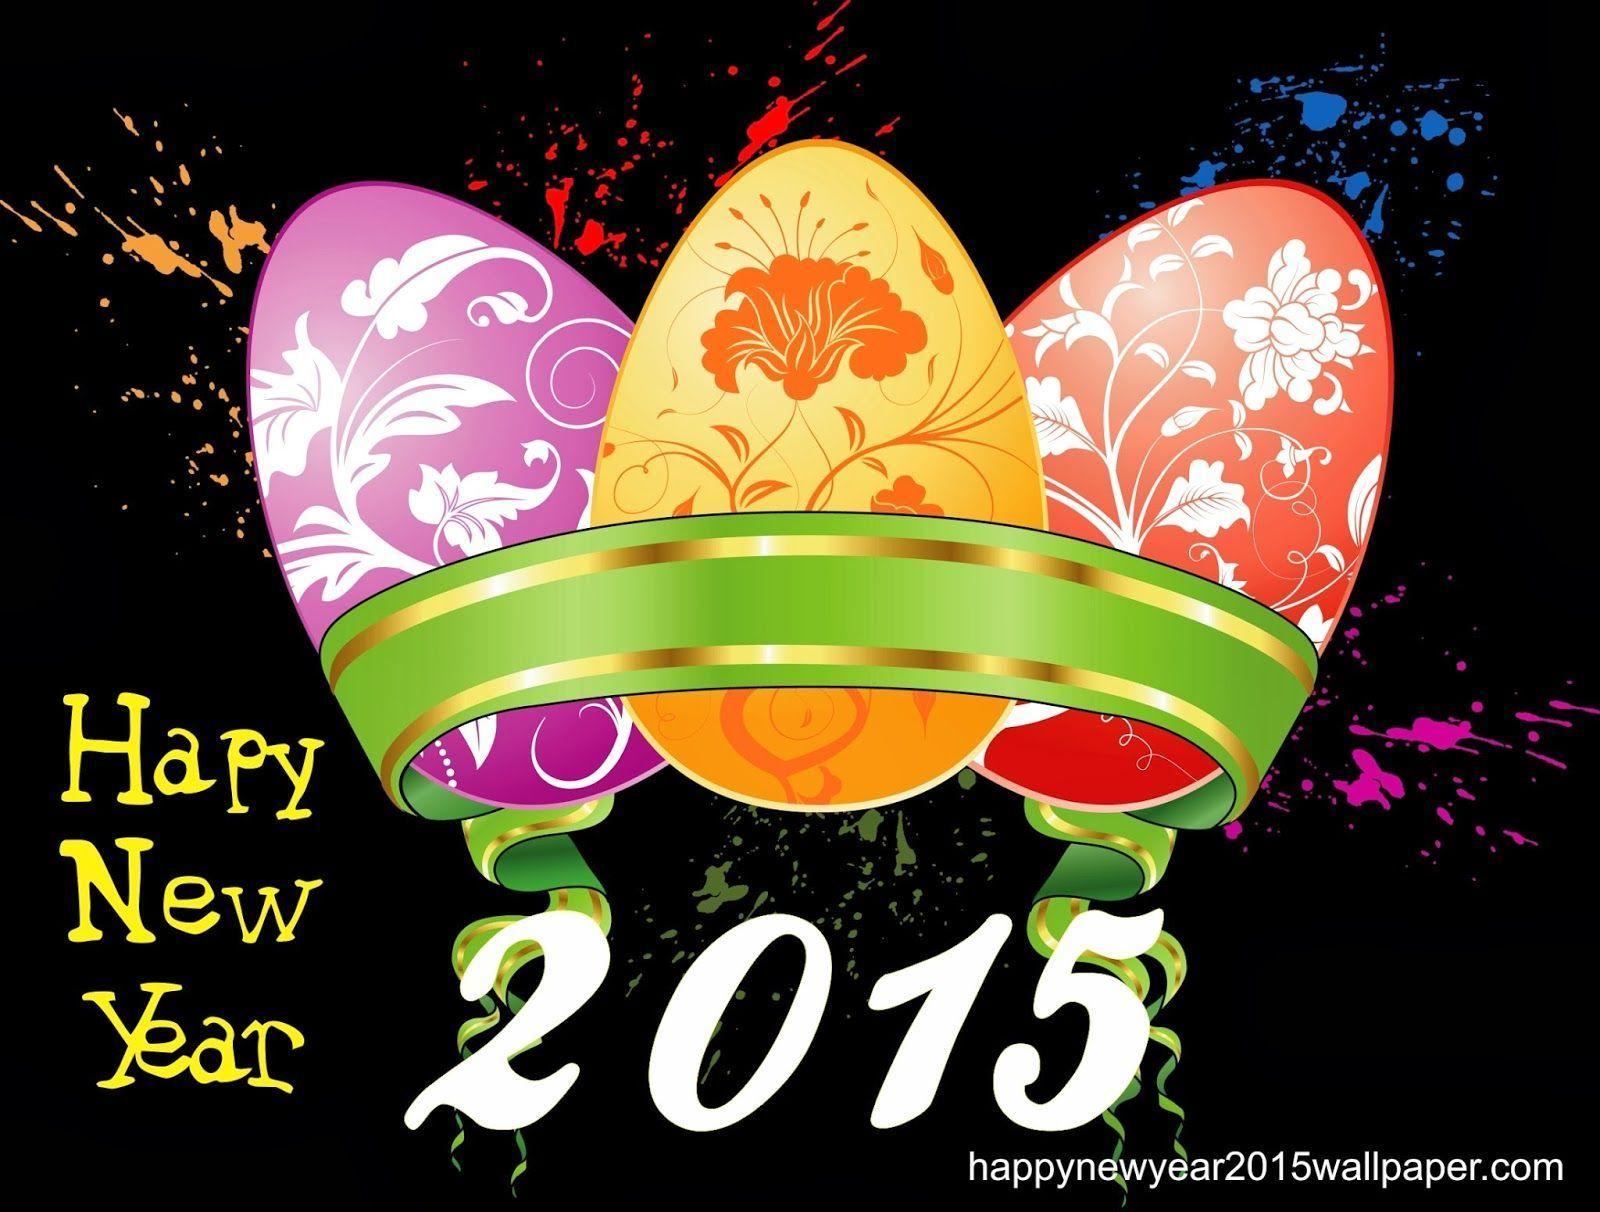 Wish You All and Your Family Vary Very Happy New Year 2015 From